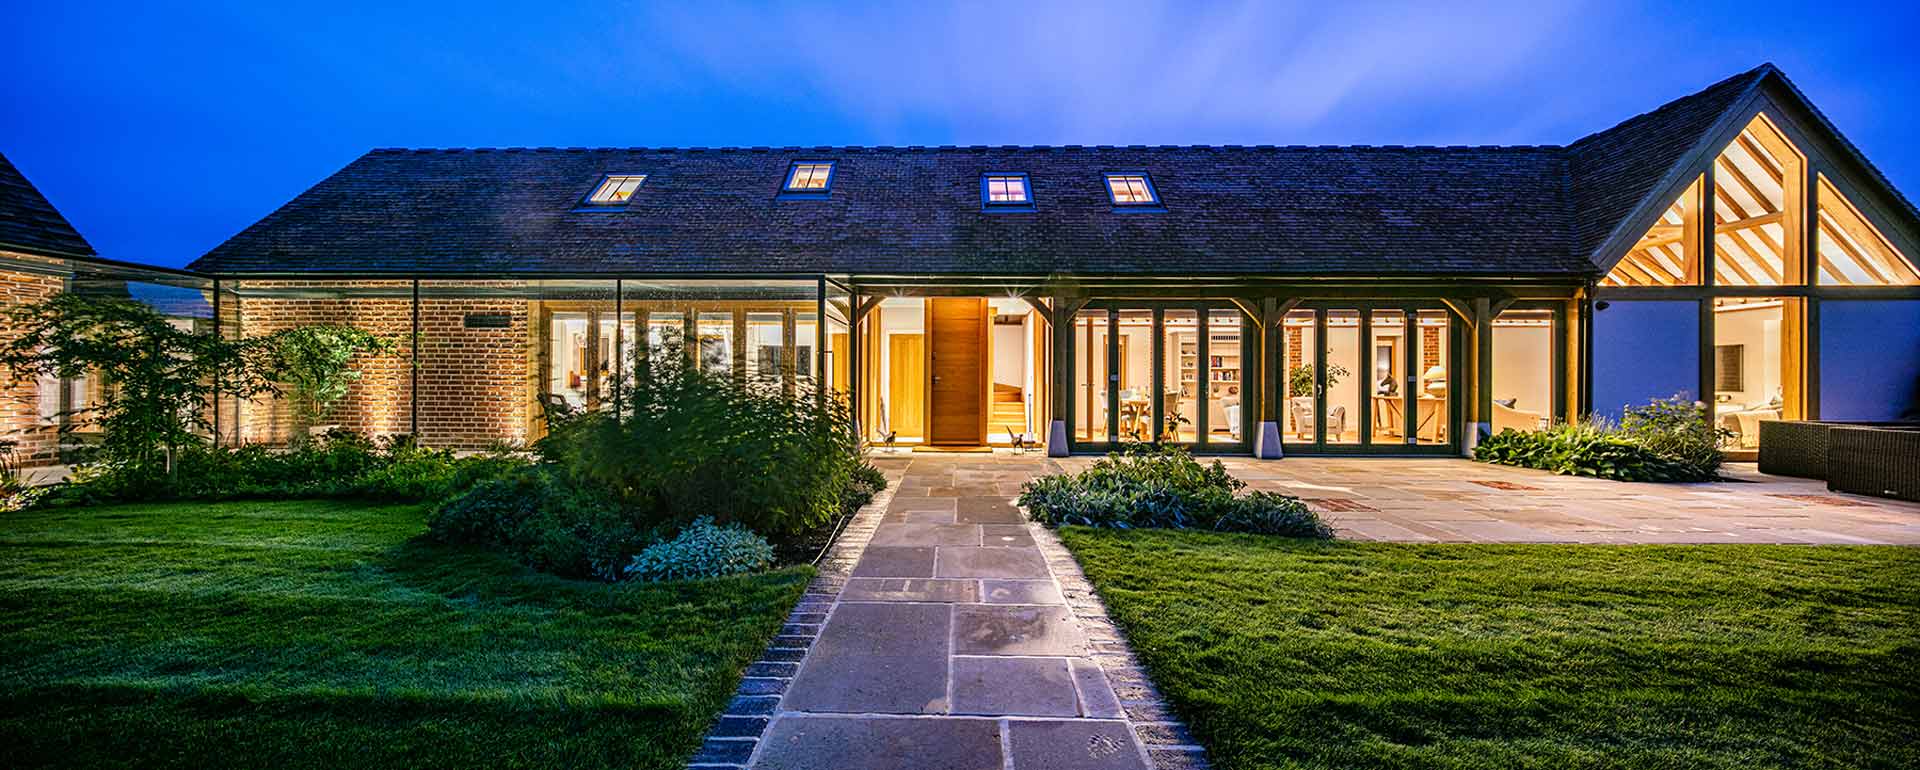 Image of a barn-style building at night with contemporary bifold doors and a large gable installation of triple-glazed windows finished with oak beams.